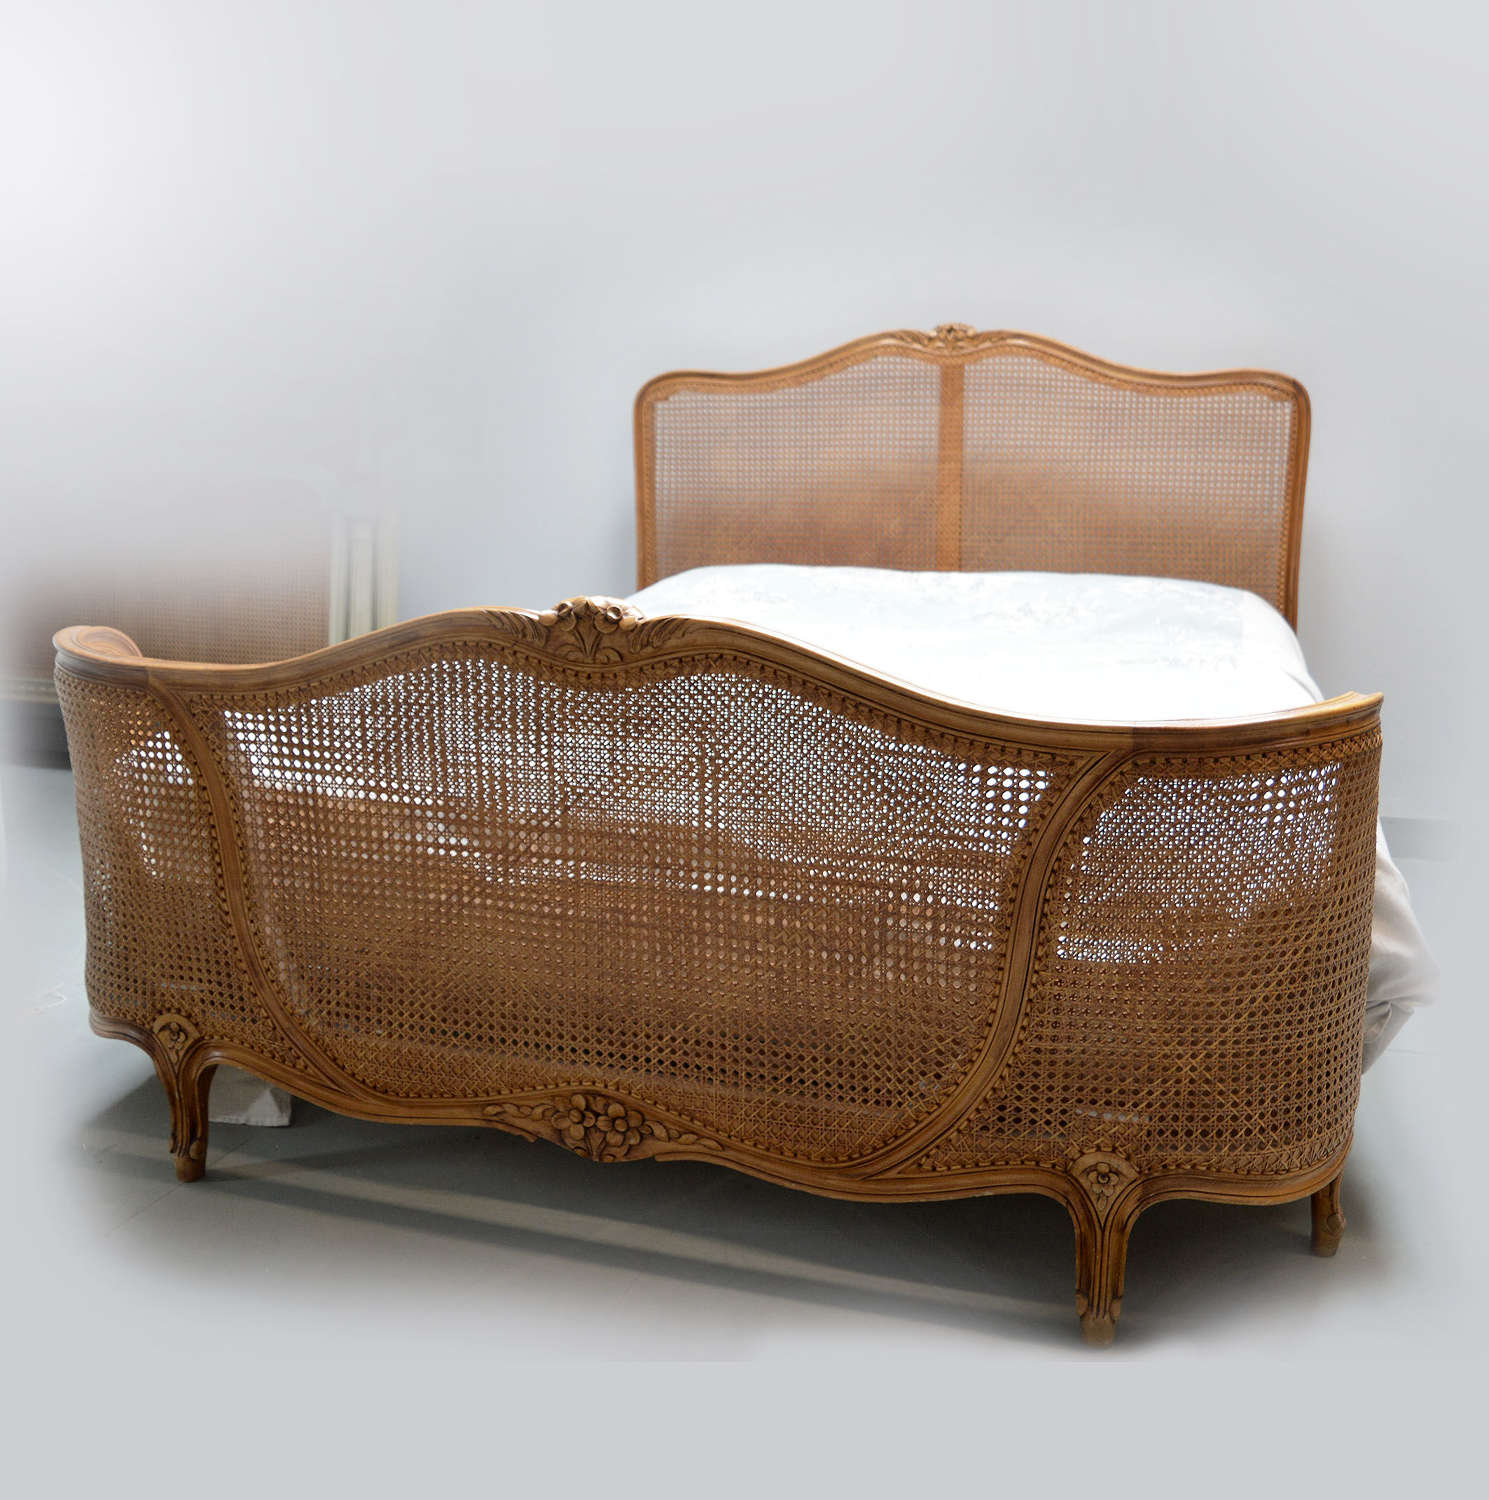 King-size Louis XV style cane bedstead